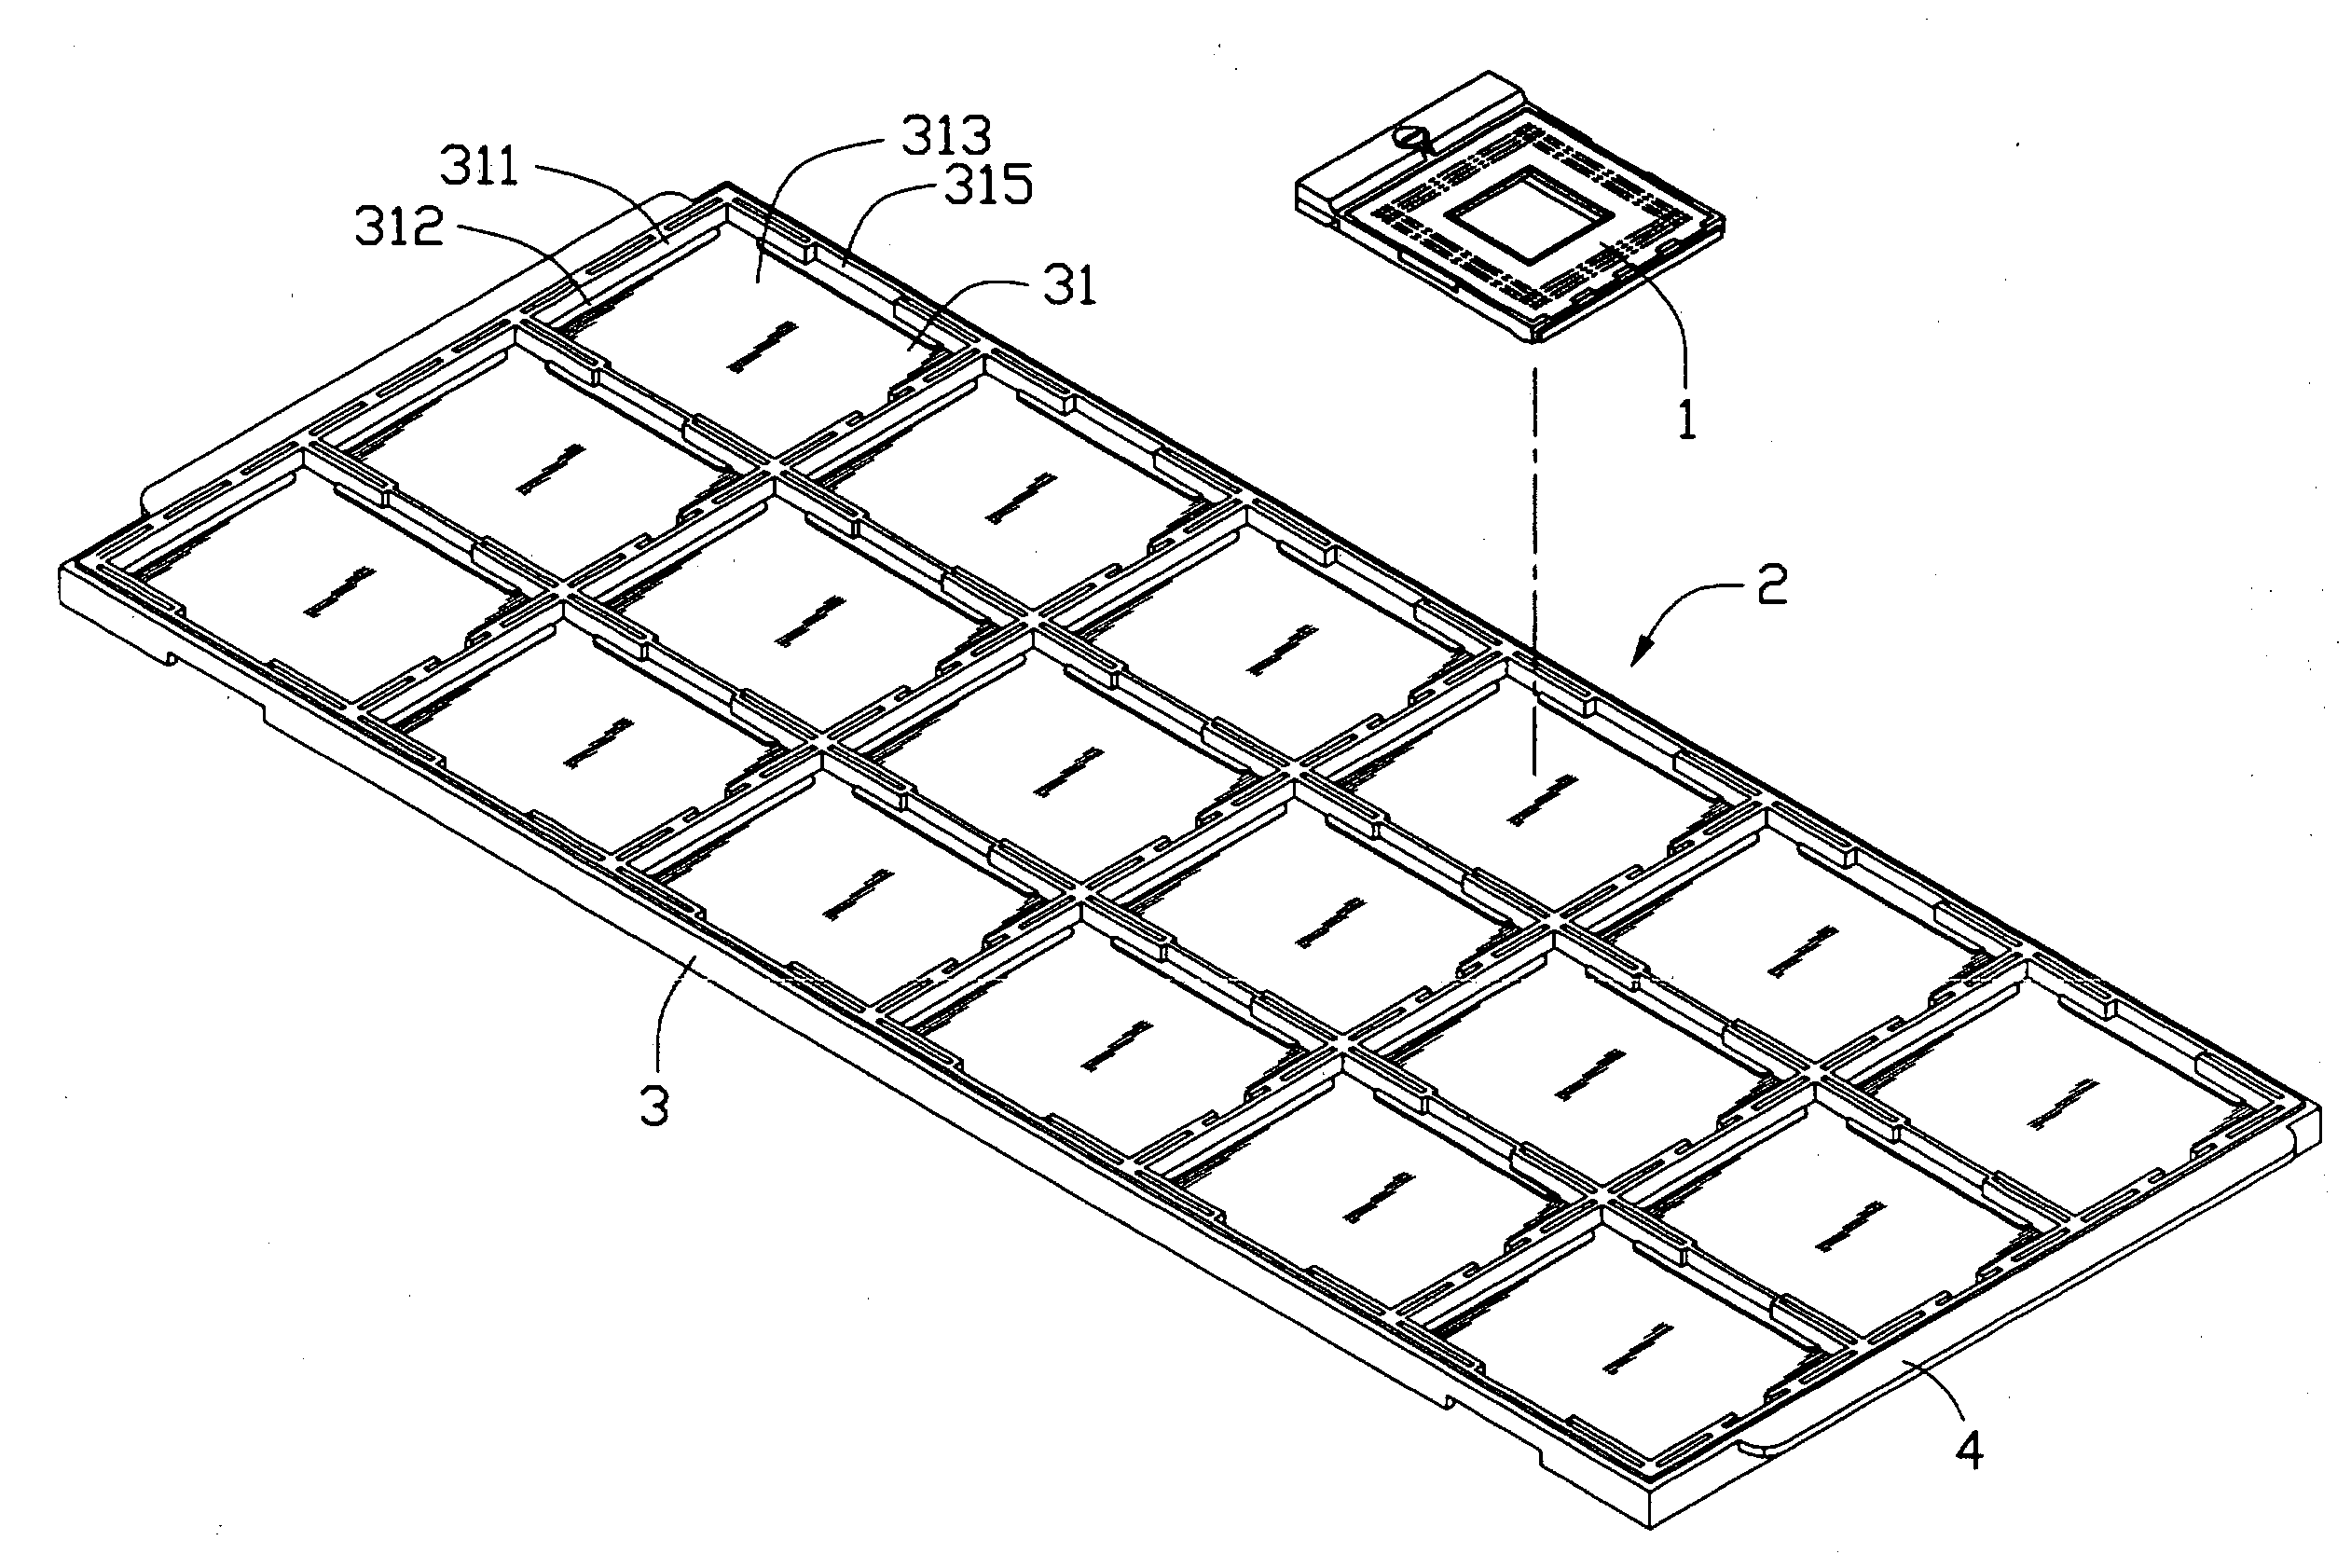 Connector packaging tray with supporting standoffs